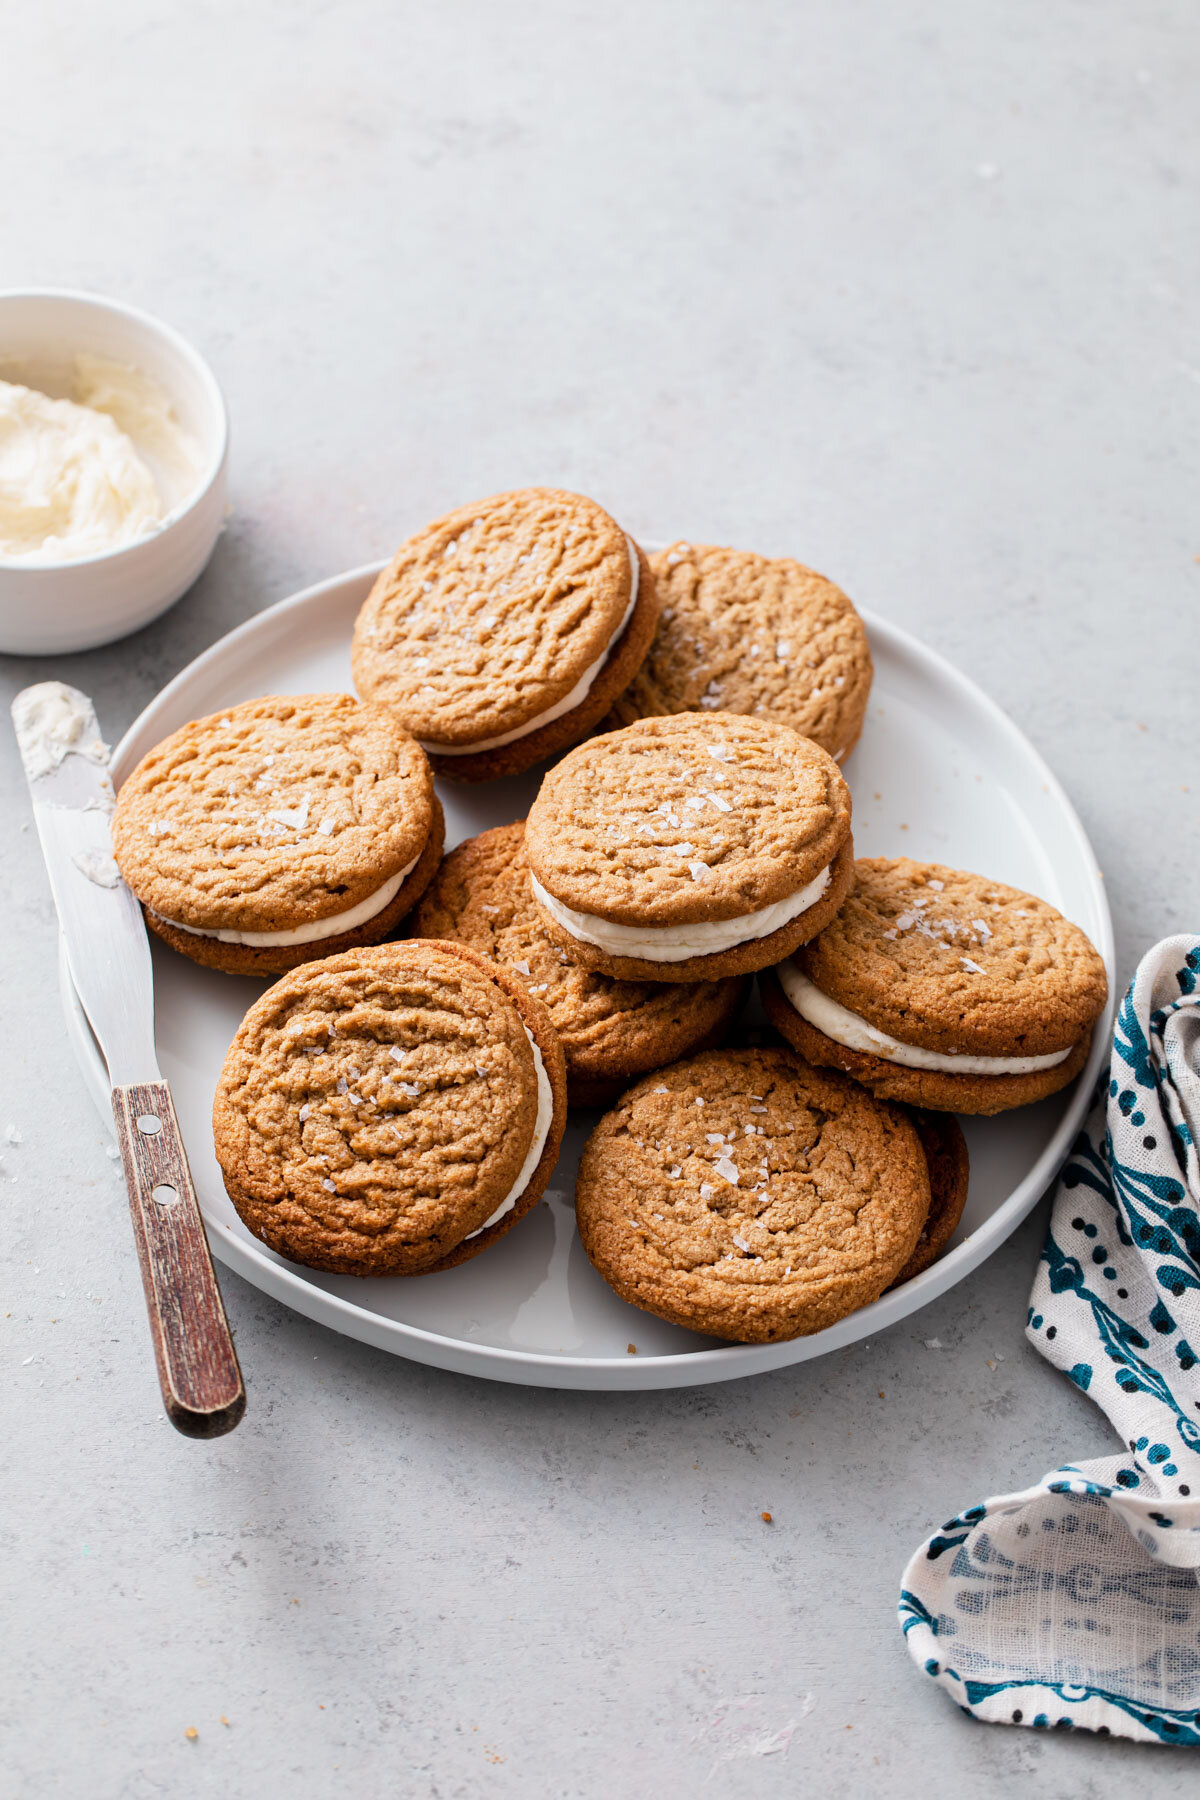 A plate of Flourless Peanut Butter Cookies filled with vanilla frosting.